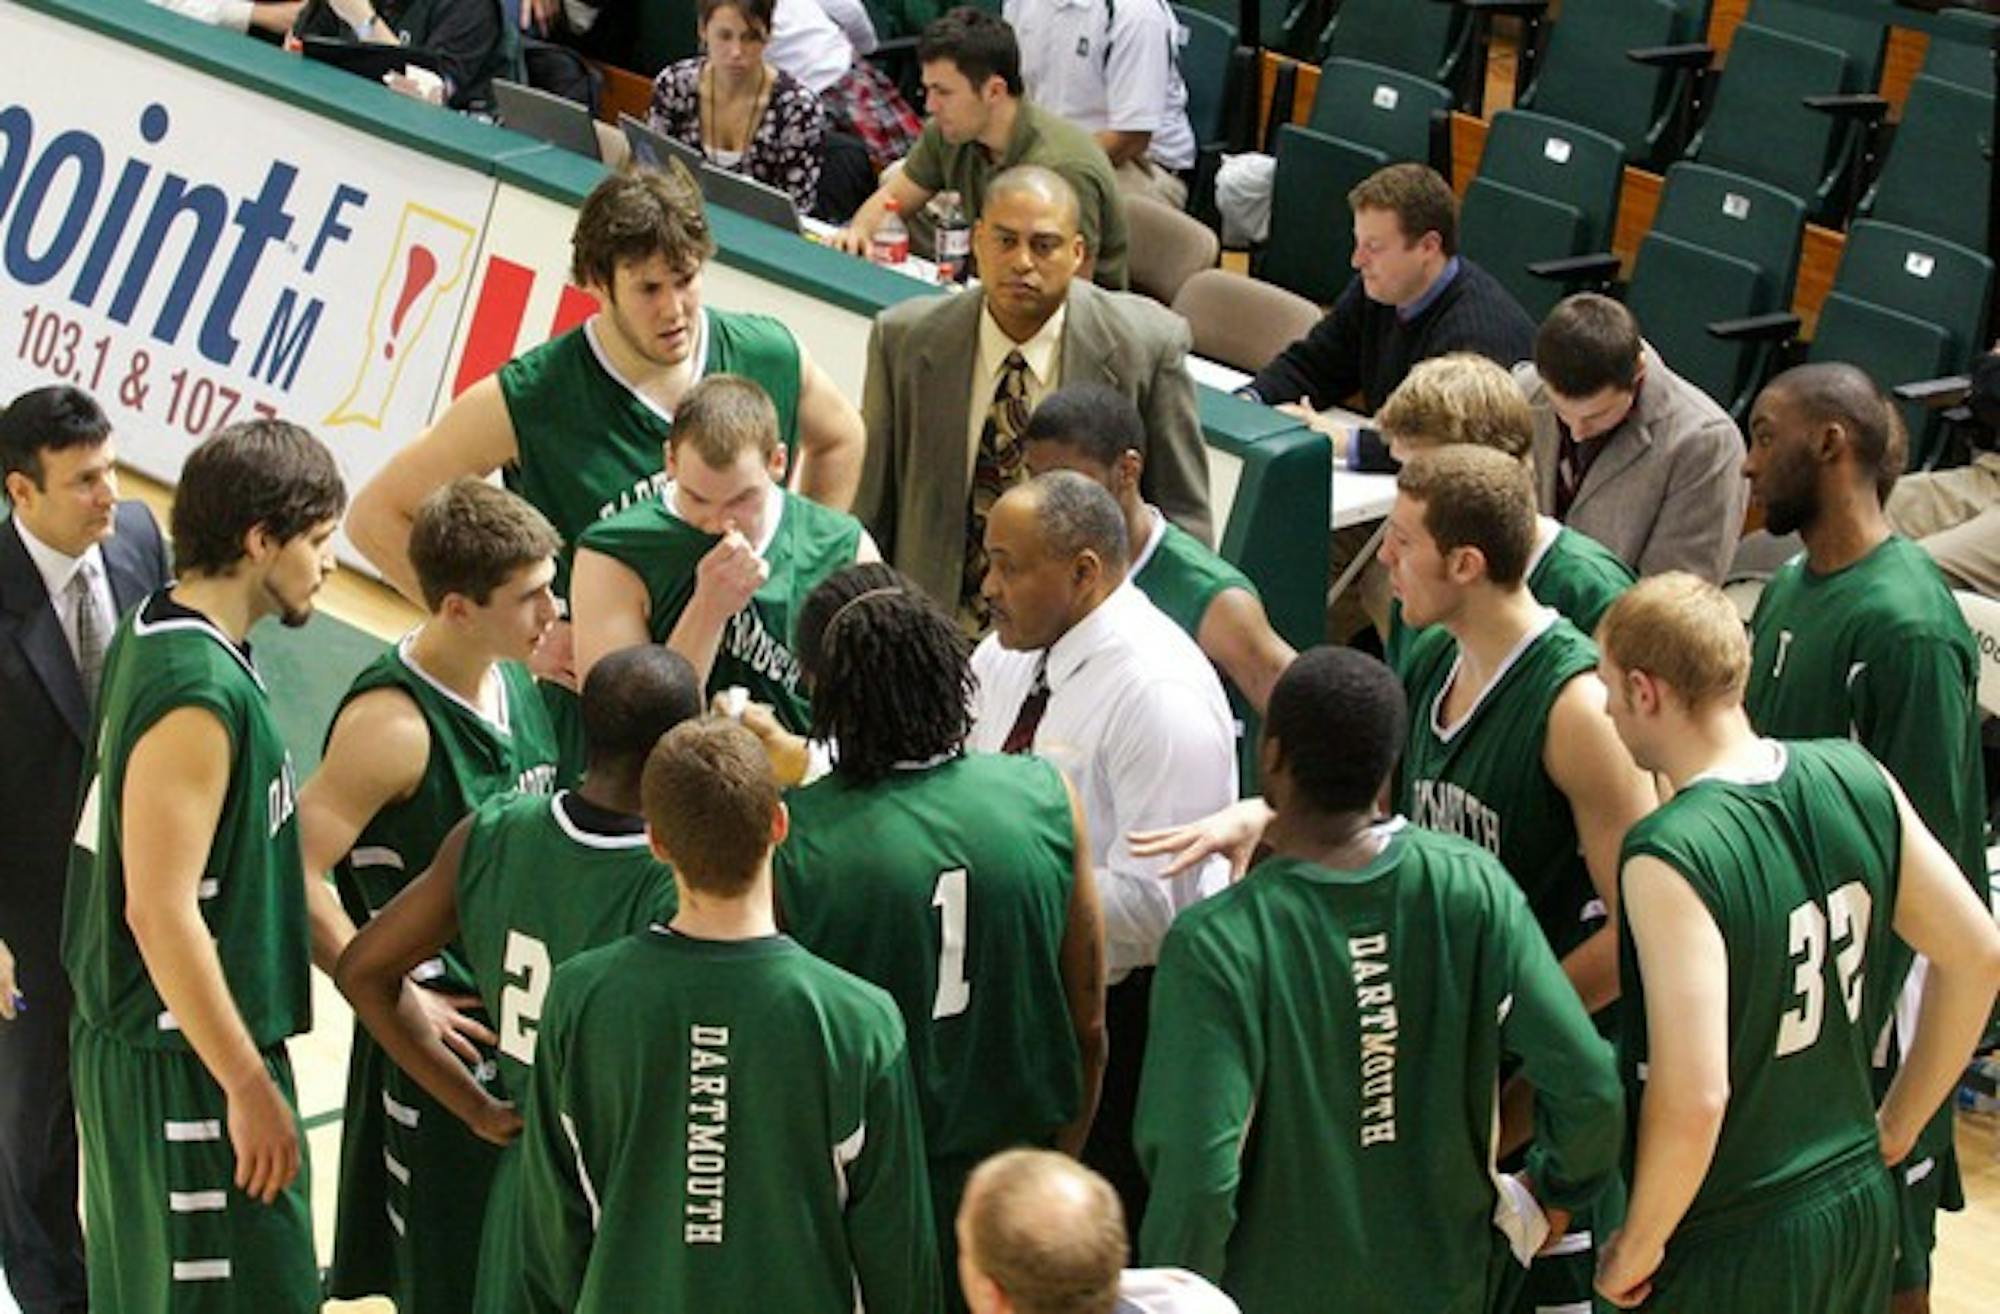 The Dartmouth men's basketball team is off to its best start in conference play in 10 years, currently claiming the number-three spot in the Ivy League standings.